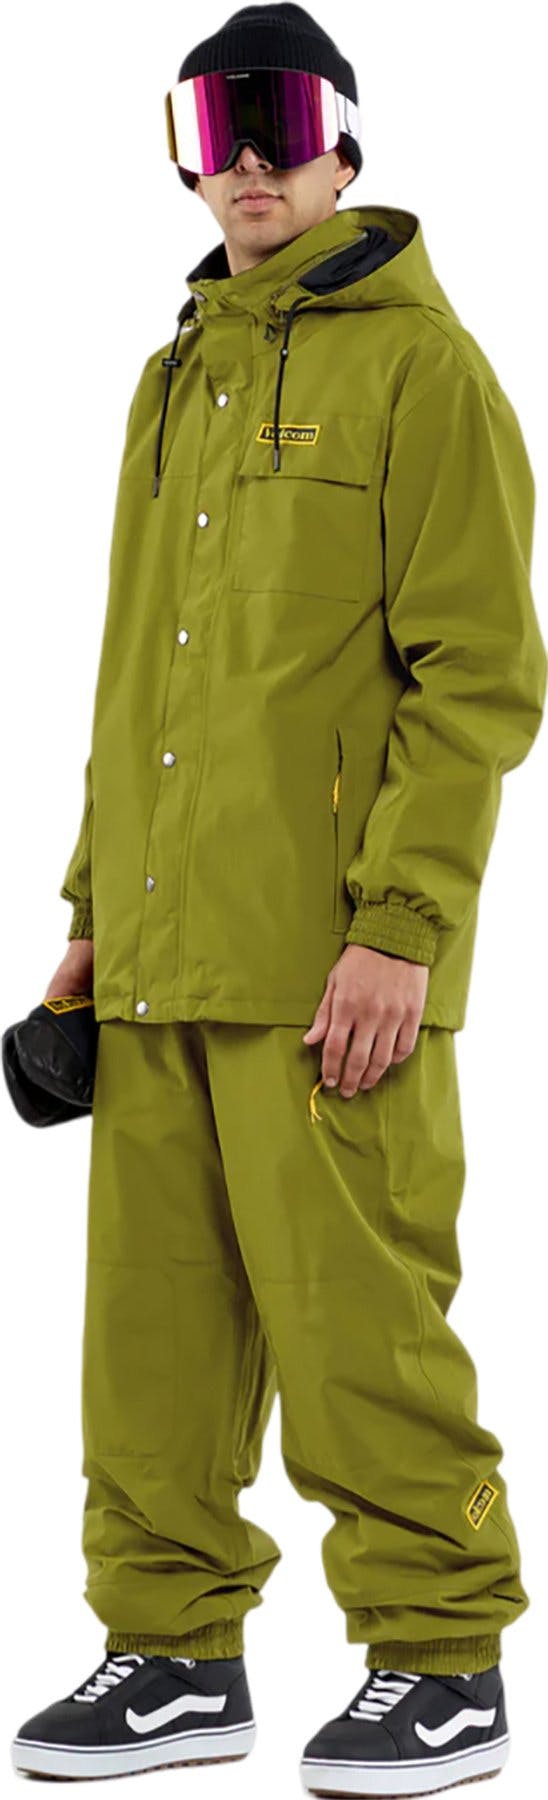 Product image for Longo GORE-TEX Trousers - Men's